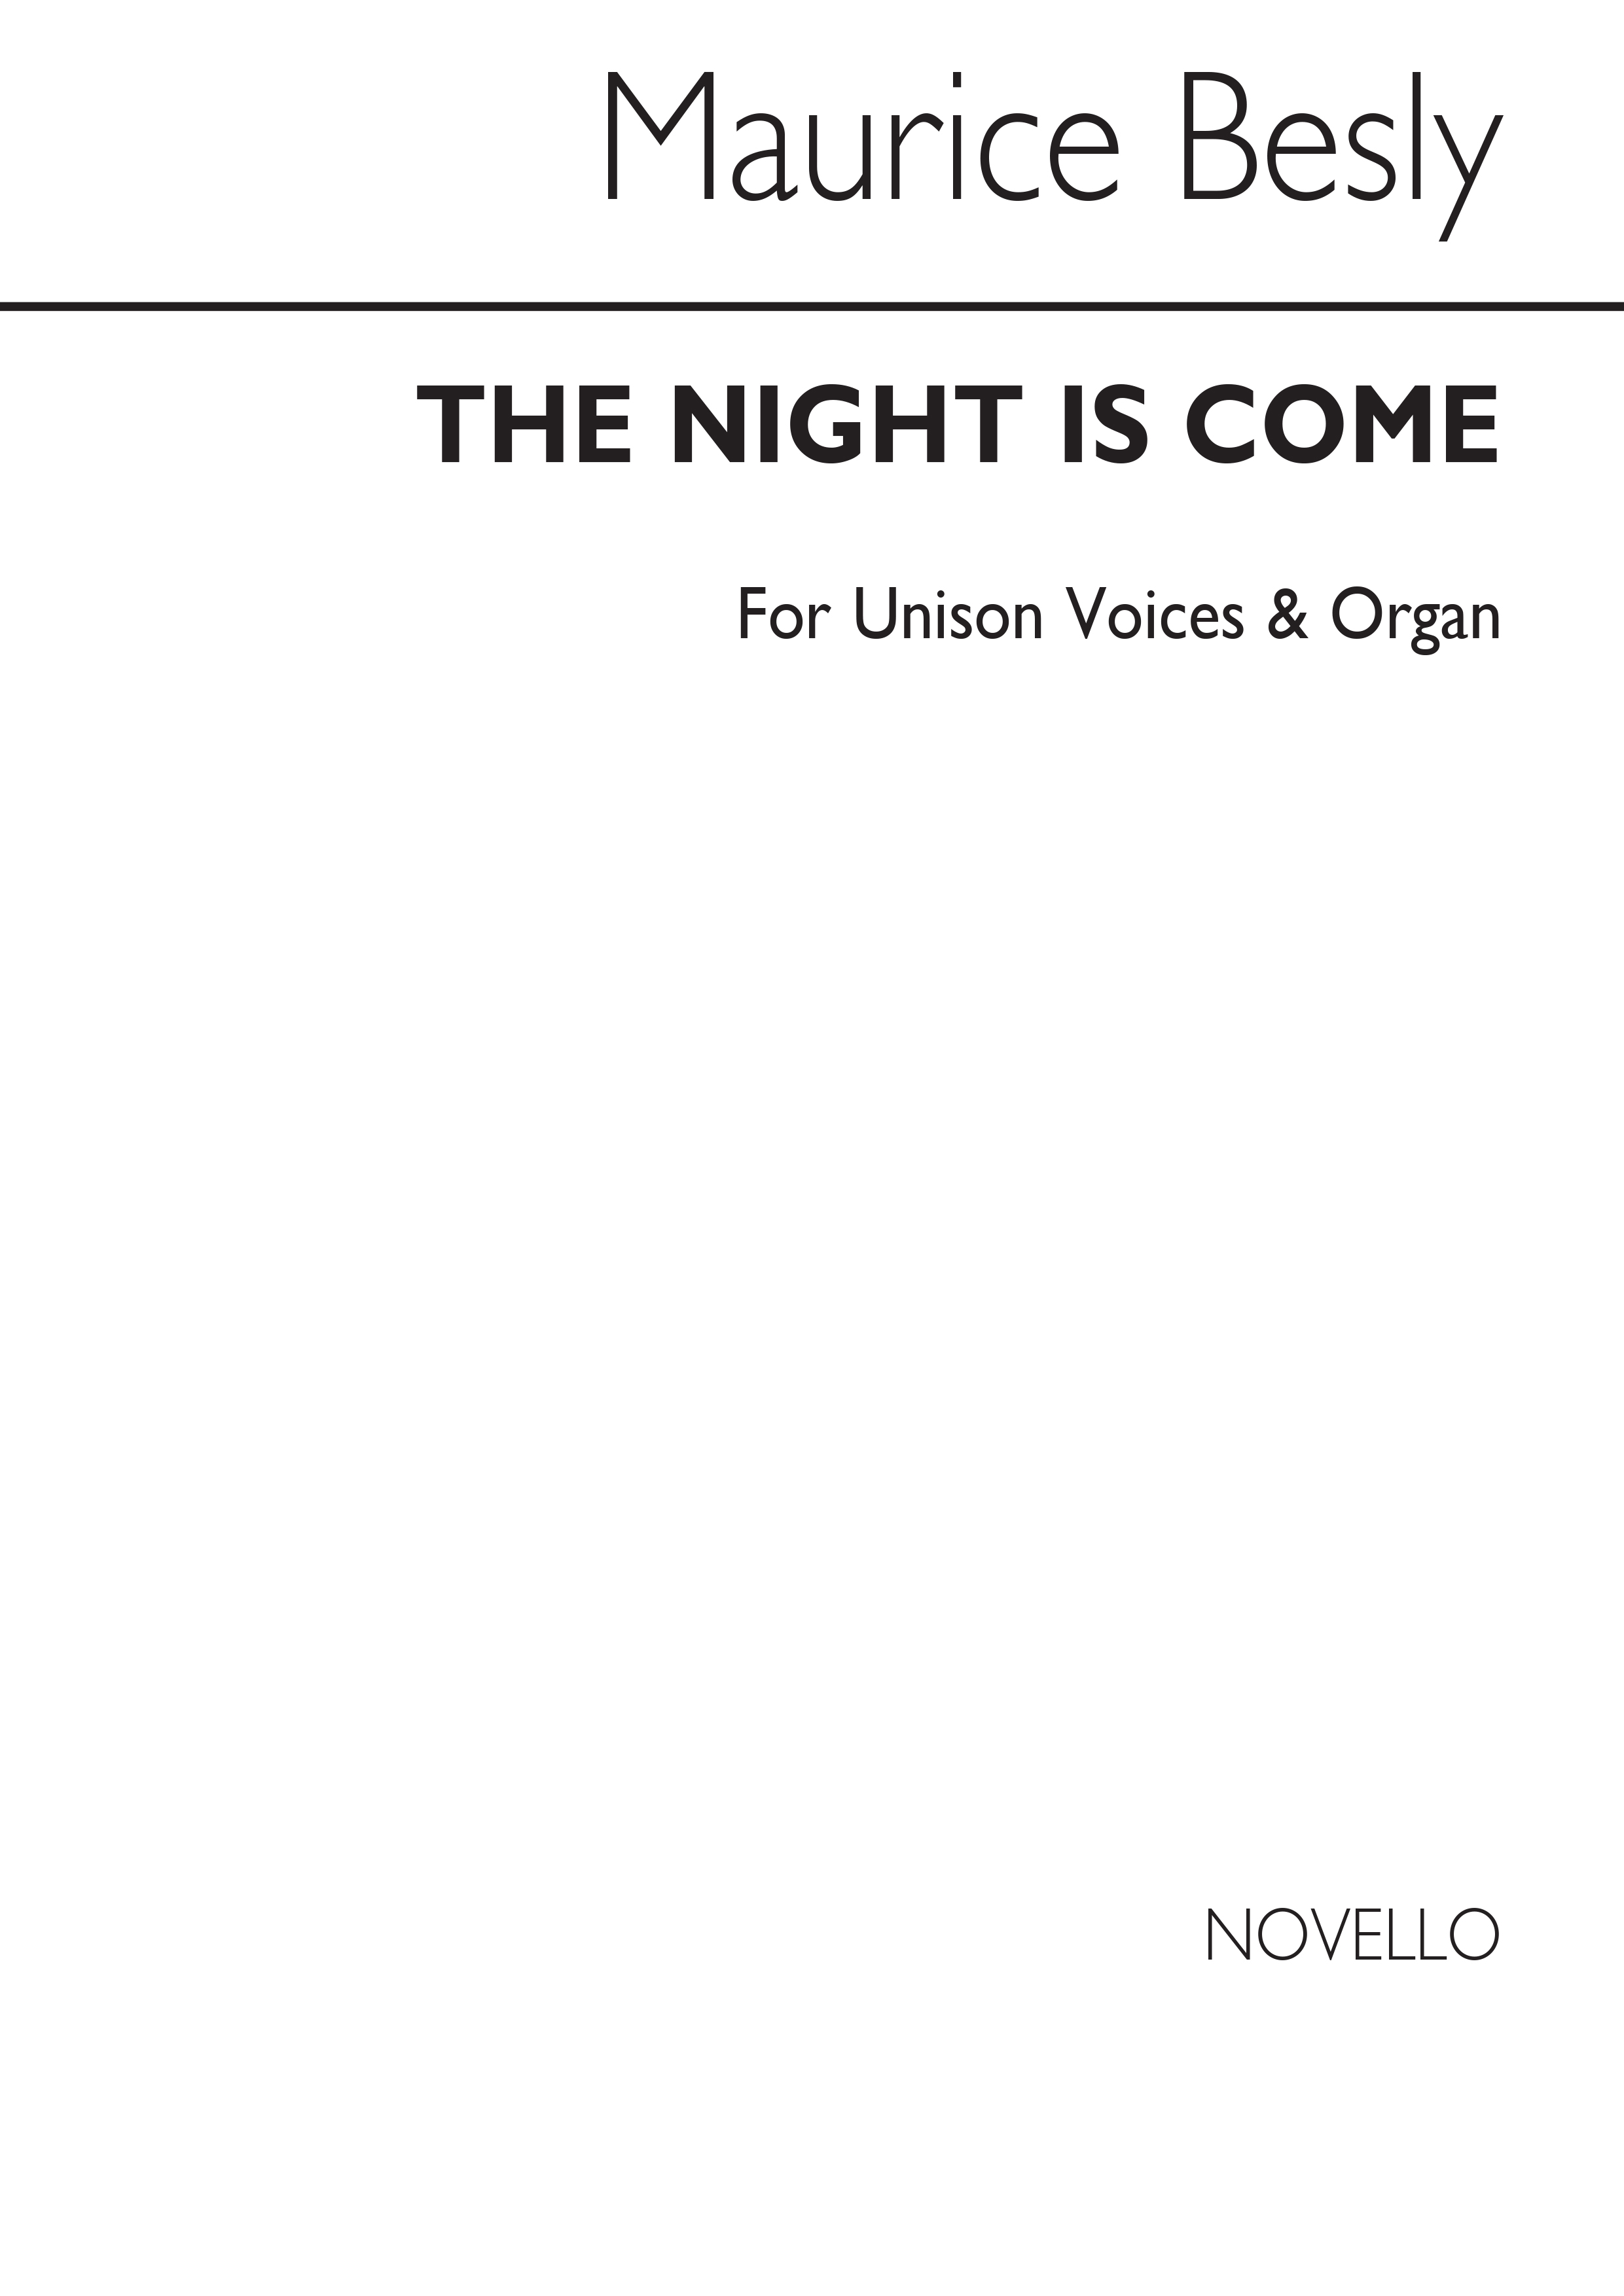 Maurice Besly: The Night Is Come Unison/Organ